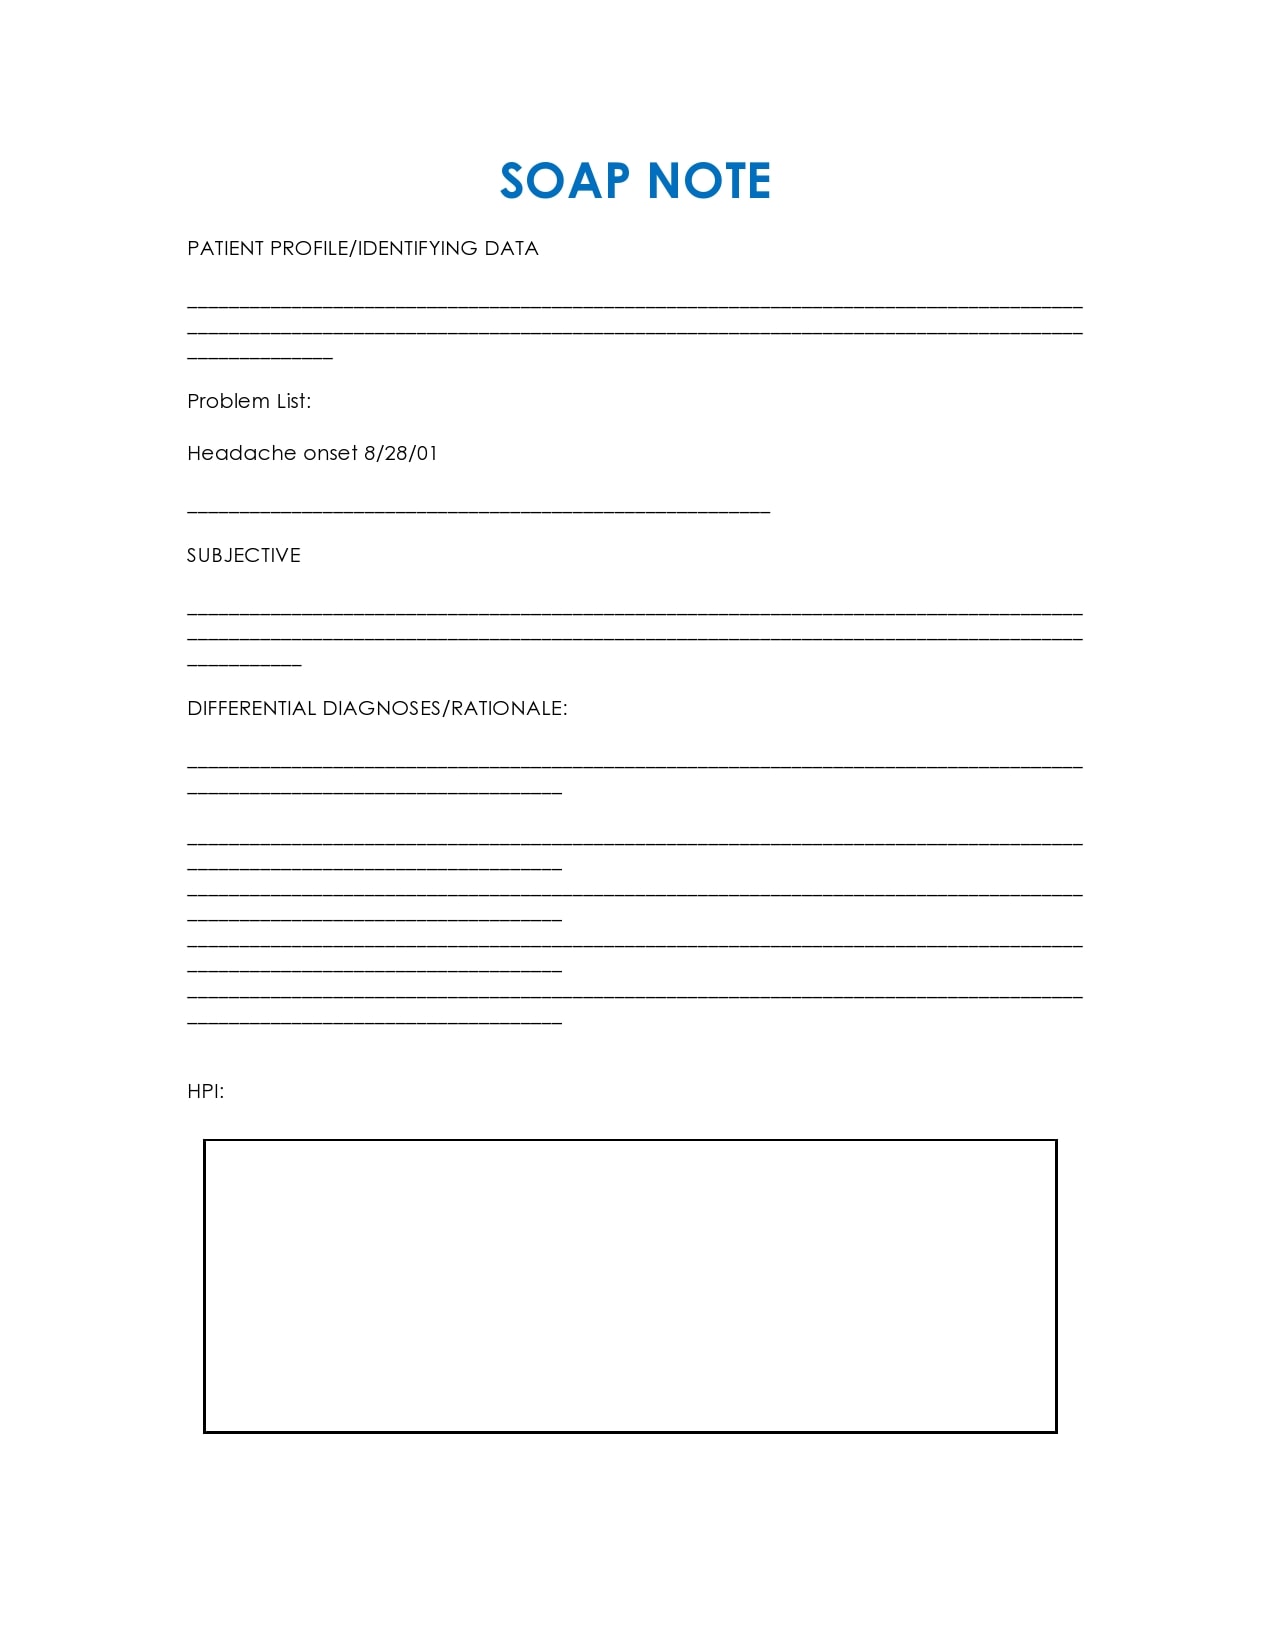 20 Blank SOAP Note Templates (+Examples) - TemplateArchive With Regard To Case Management Progress Note Template